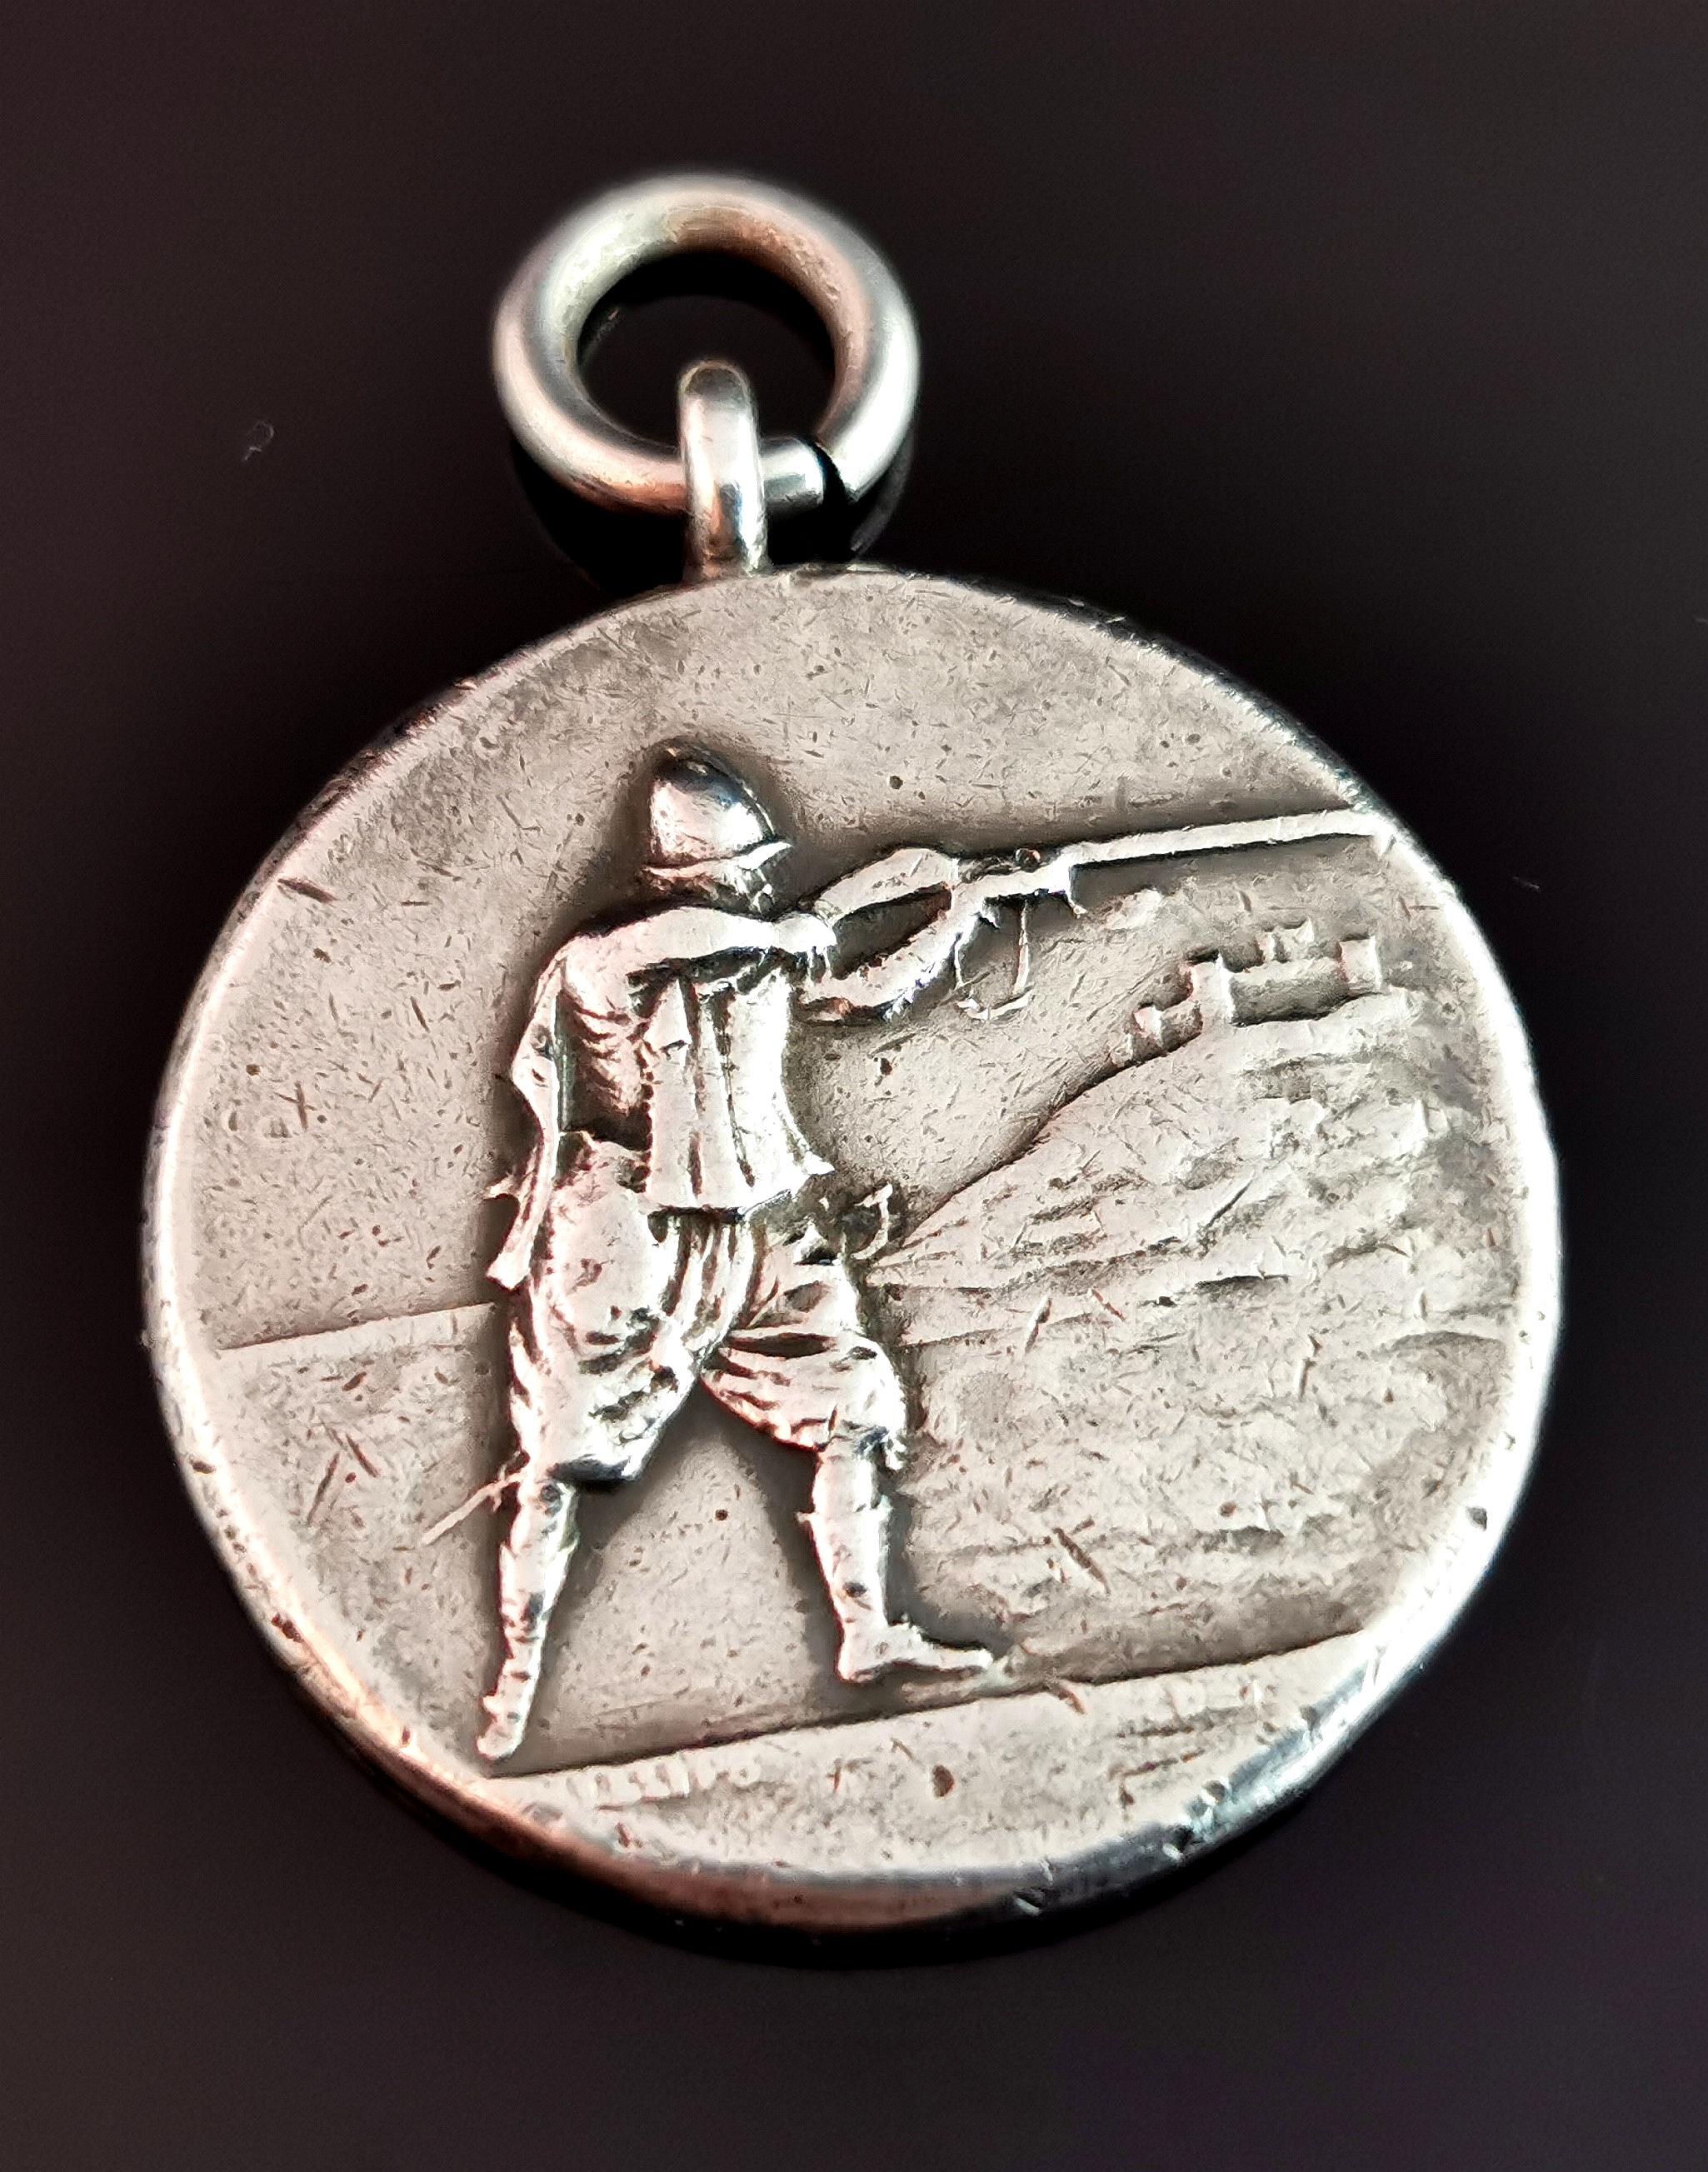 An attractive and unusual antique sterling silver fob pendant.

It is a harder to find fob with a unique design.

Circular shaped with a raised design and features a man with a rifle out shooting, presumably it was a hunting or shooting club